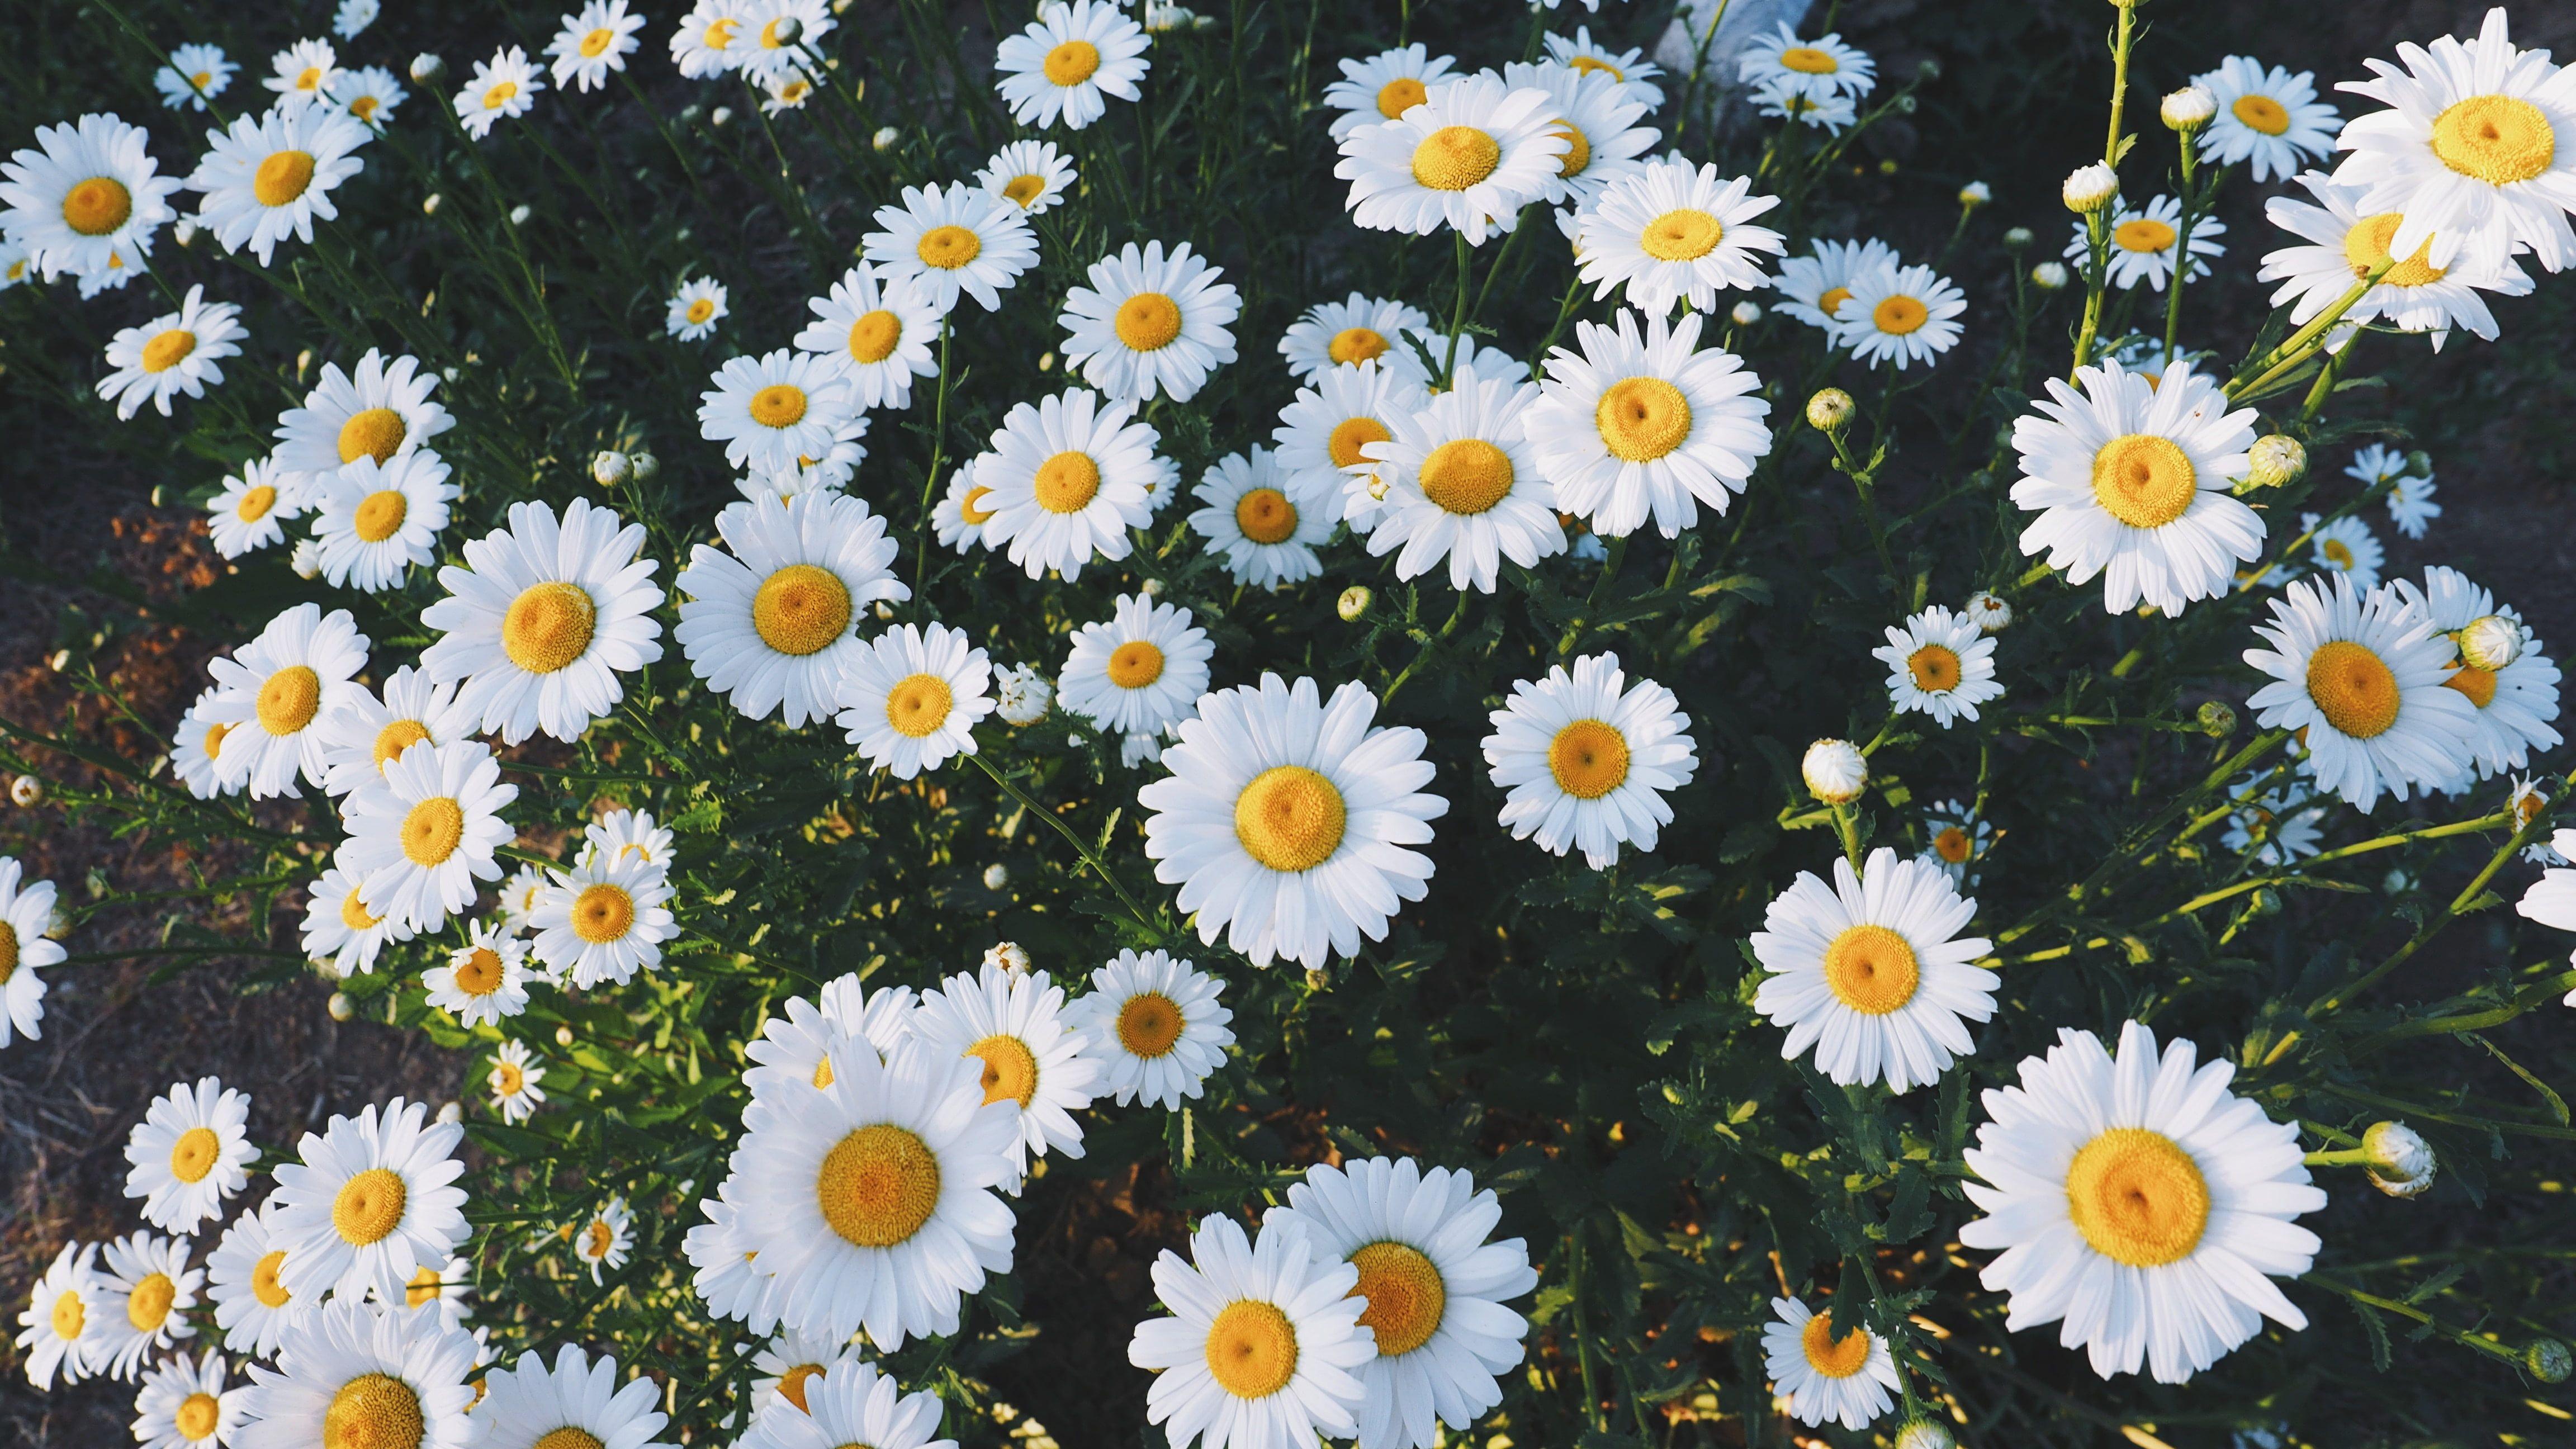 Daisy Wallpaper - iPhone, Android & Desktop Backgrounds